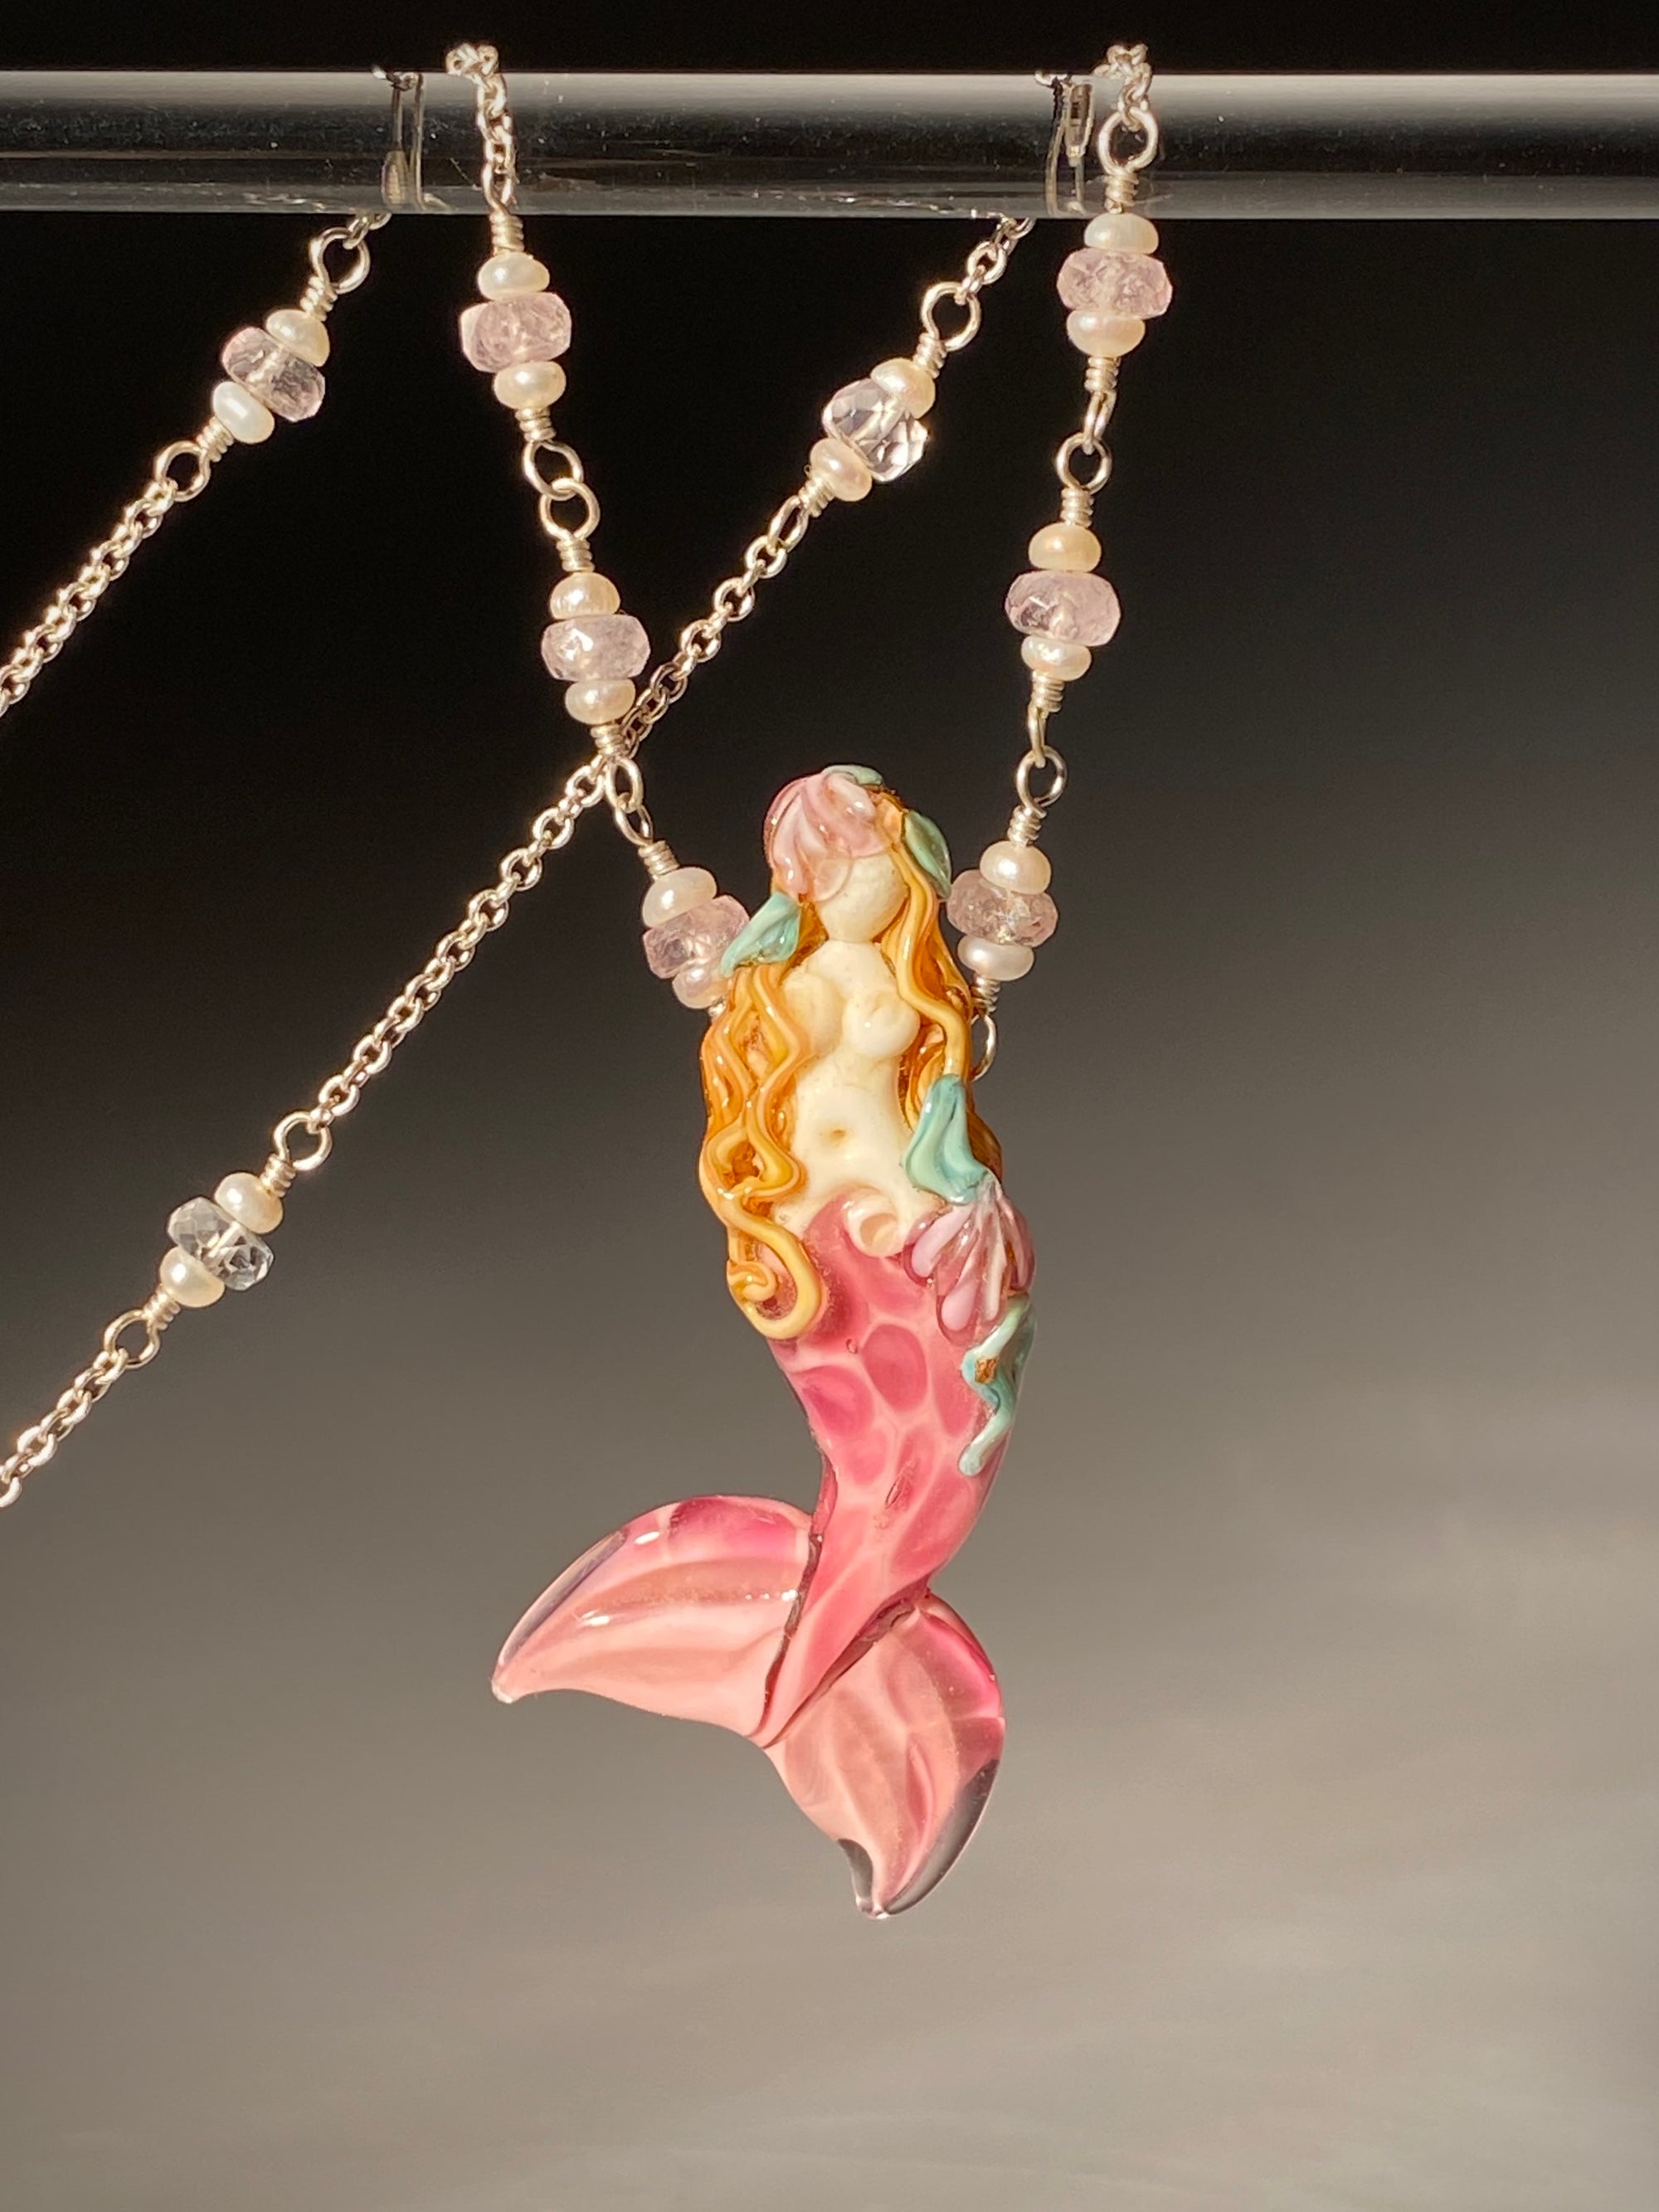 Mermaid on Sterling Silver with Jewels